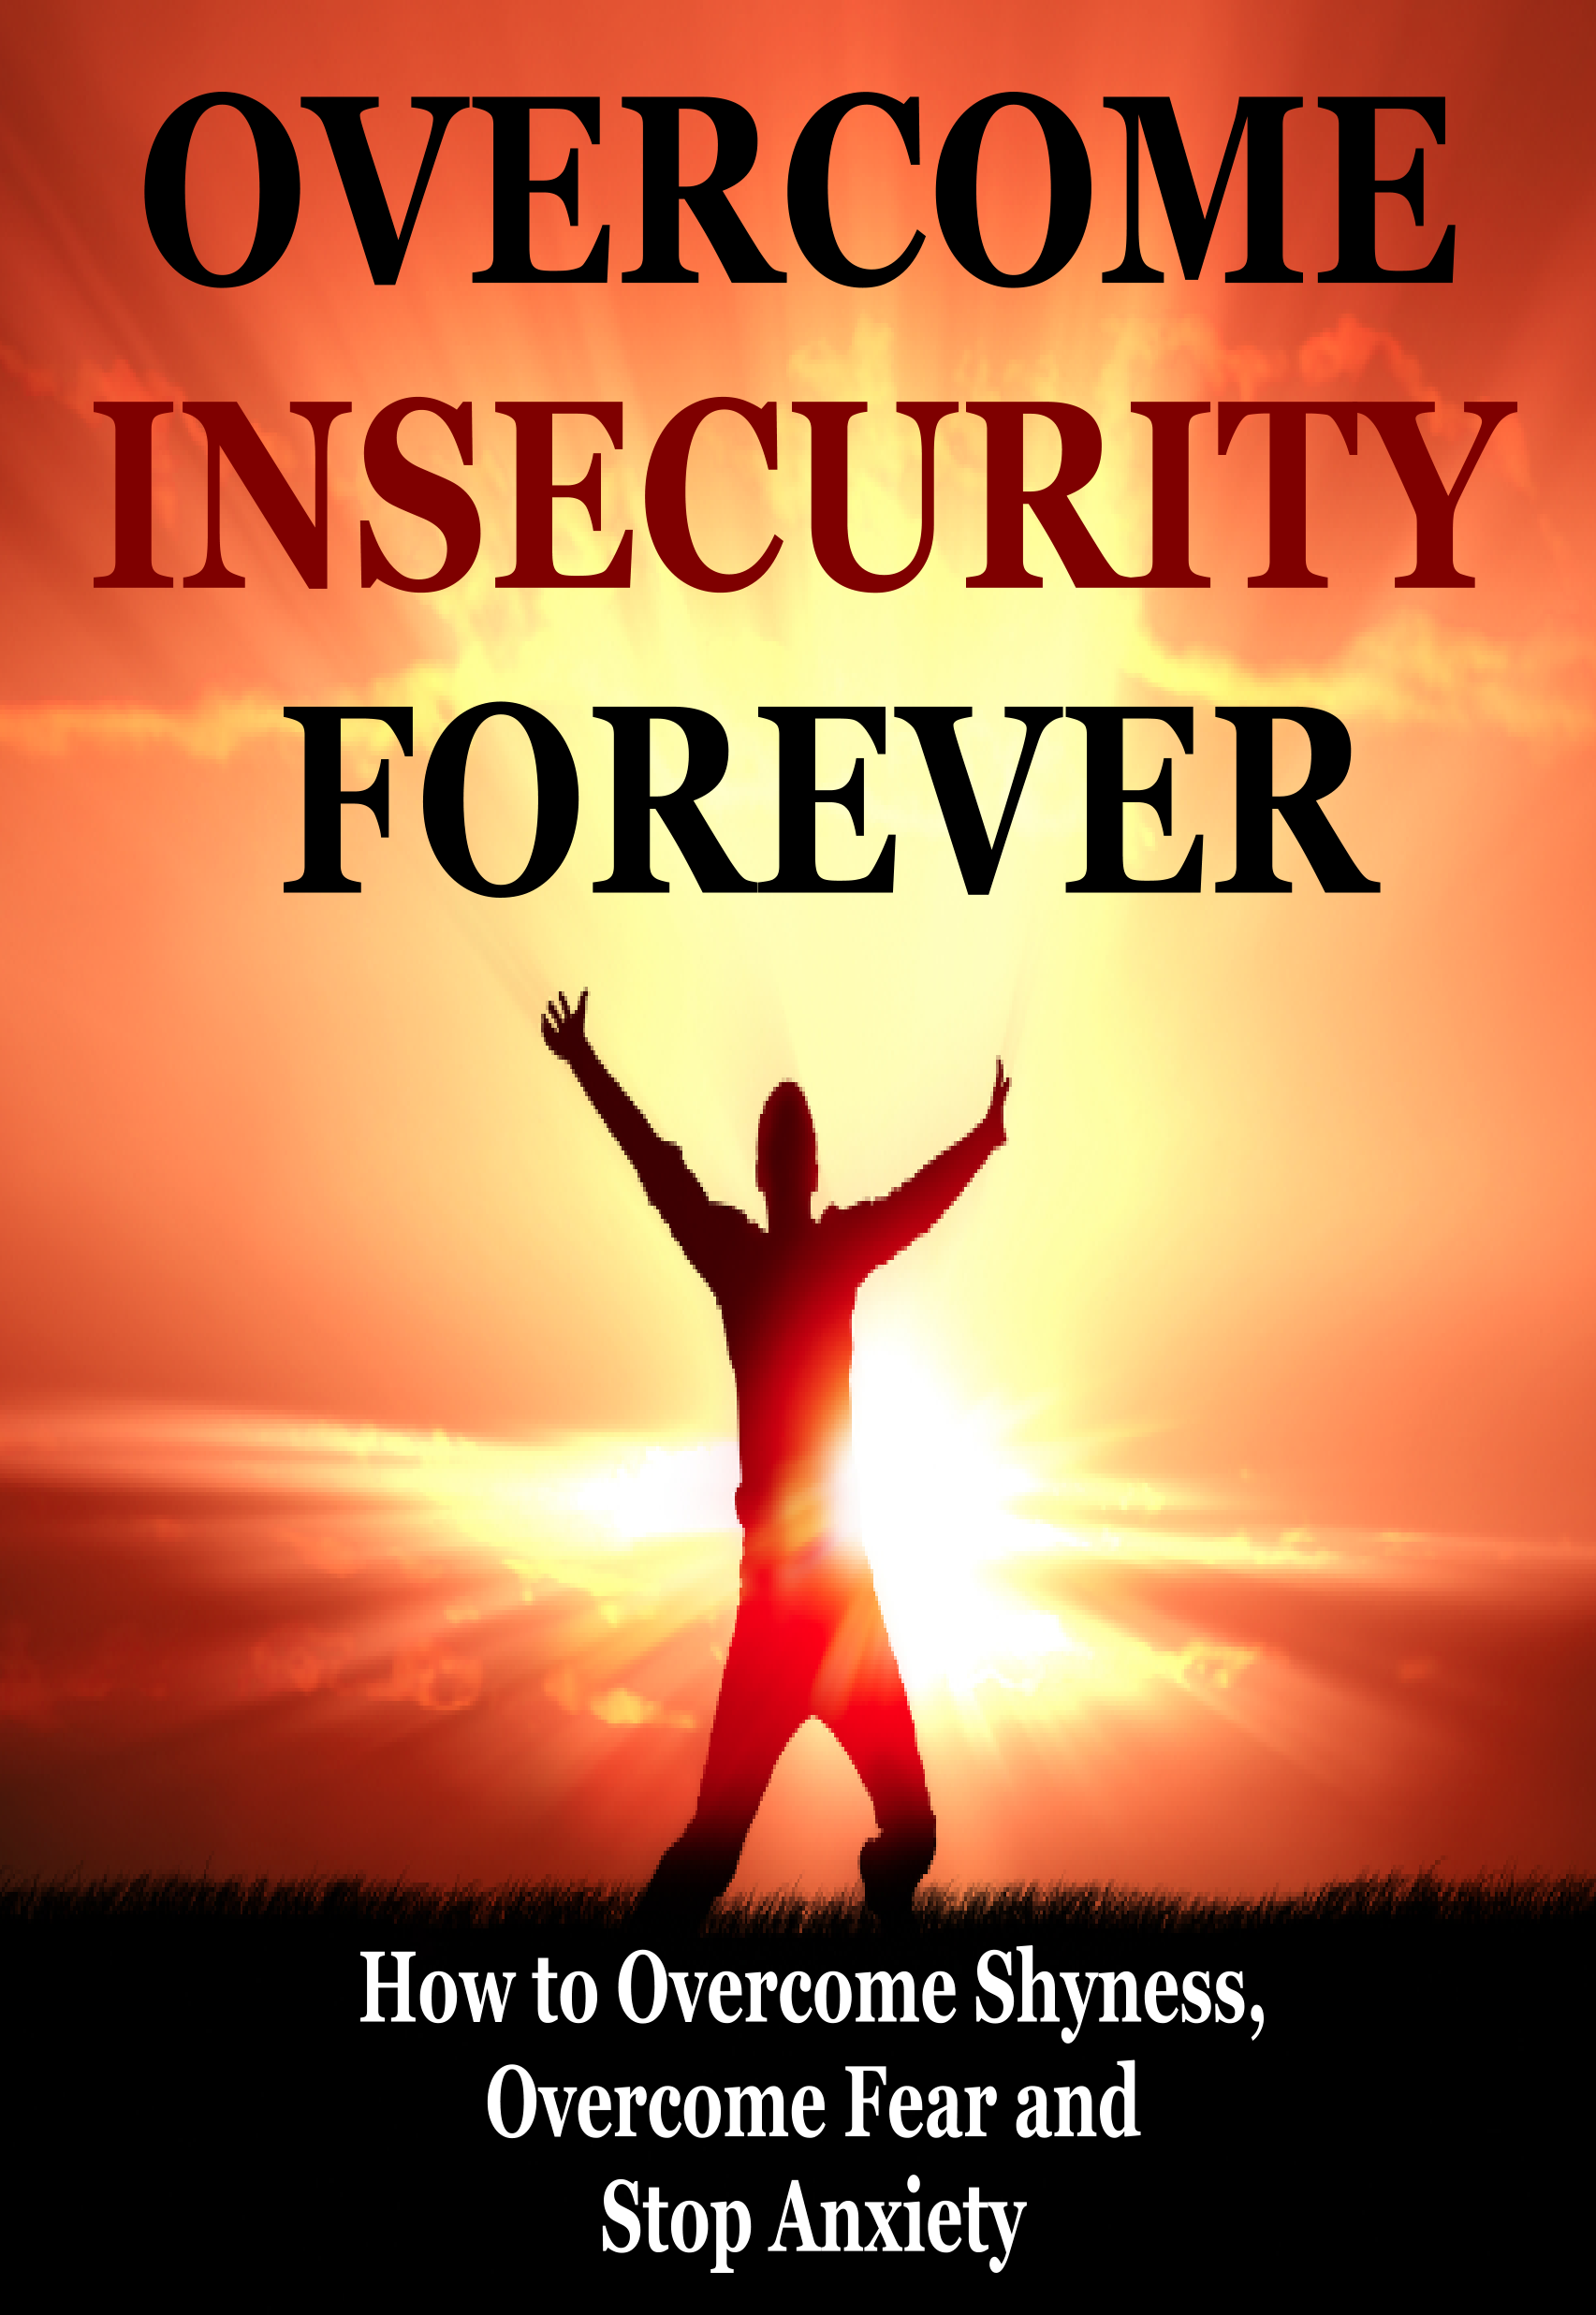 Overcome Insecurity Forever by Kris Kaynes